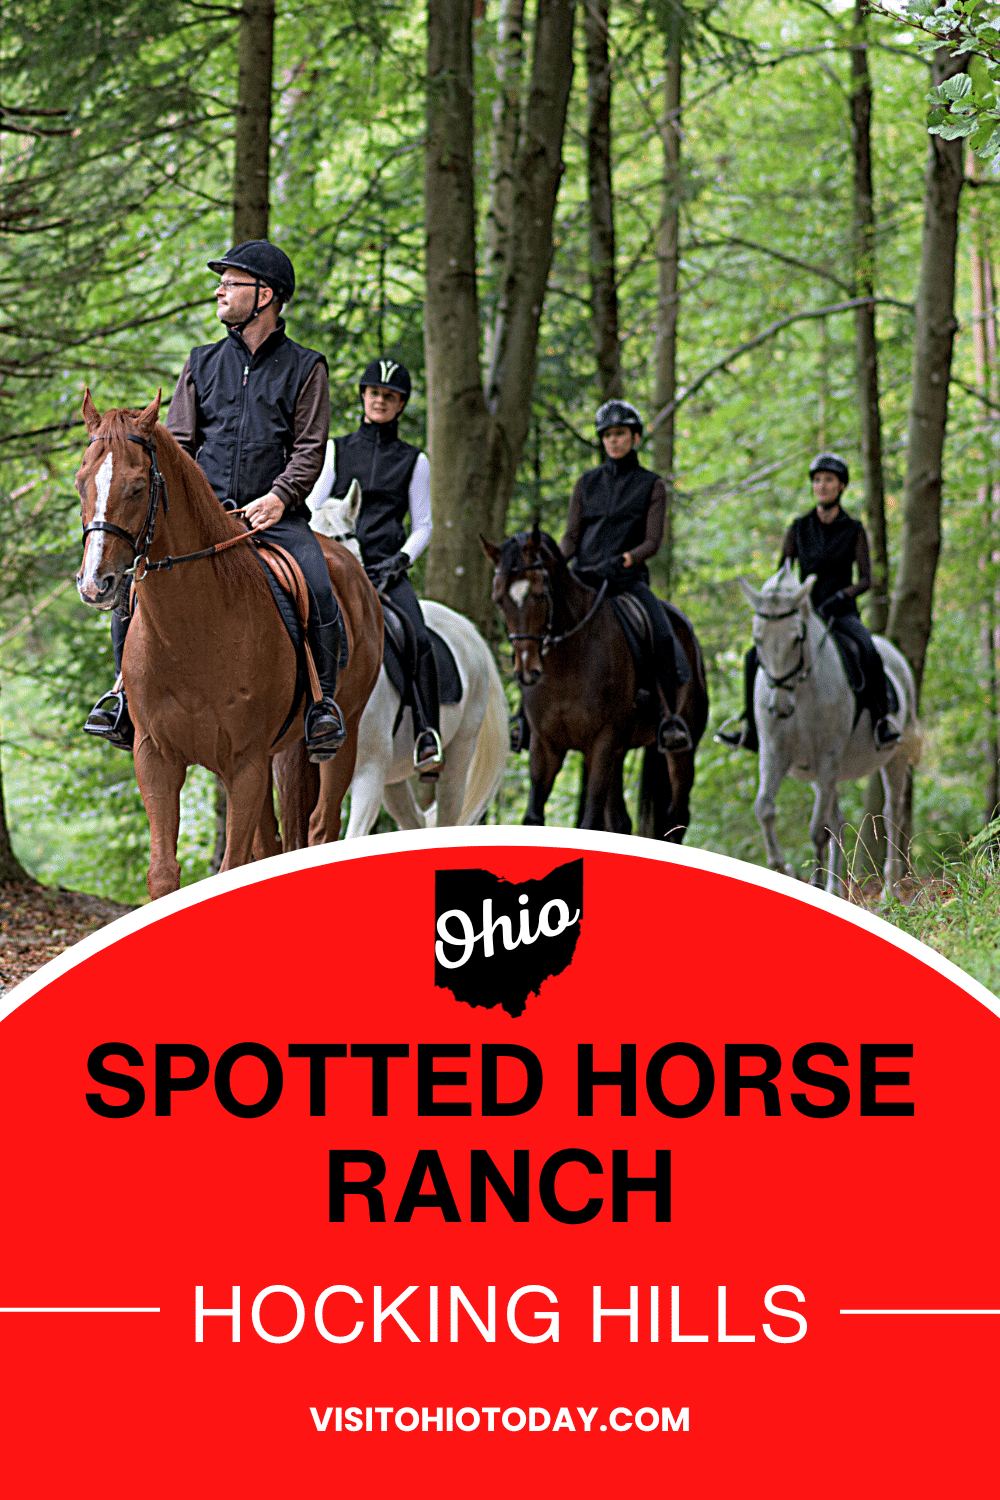 vertical image with a photo of 4 people on horseback along a tree lined trail. A red area at the bottom contains the text Spotted Horse Ranch Hocking Hills